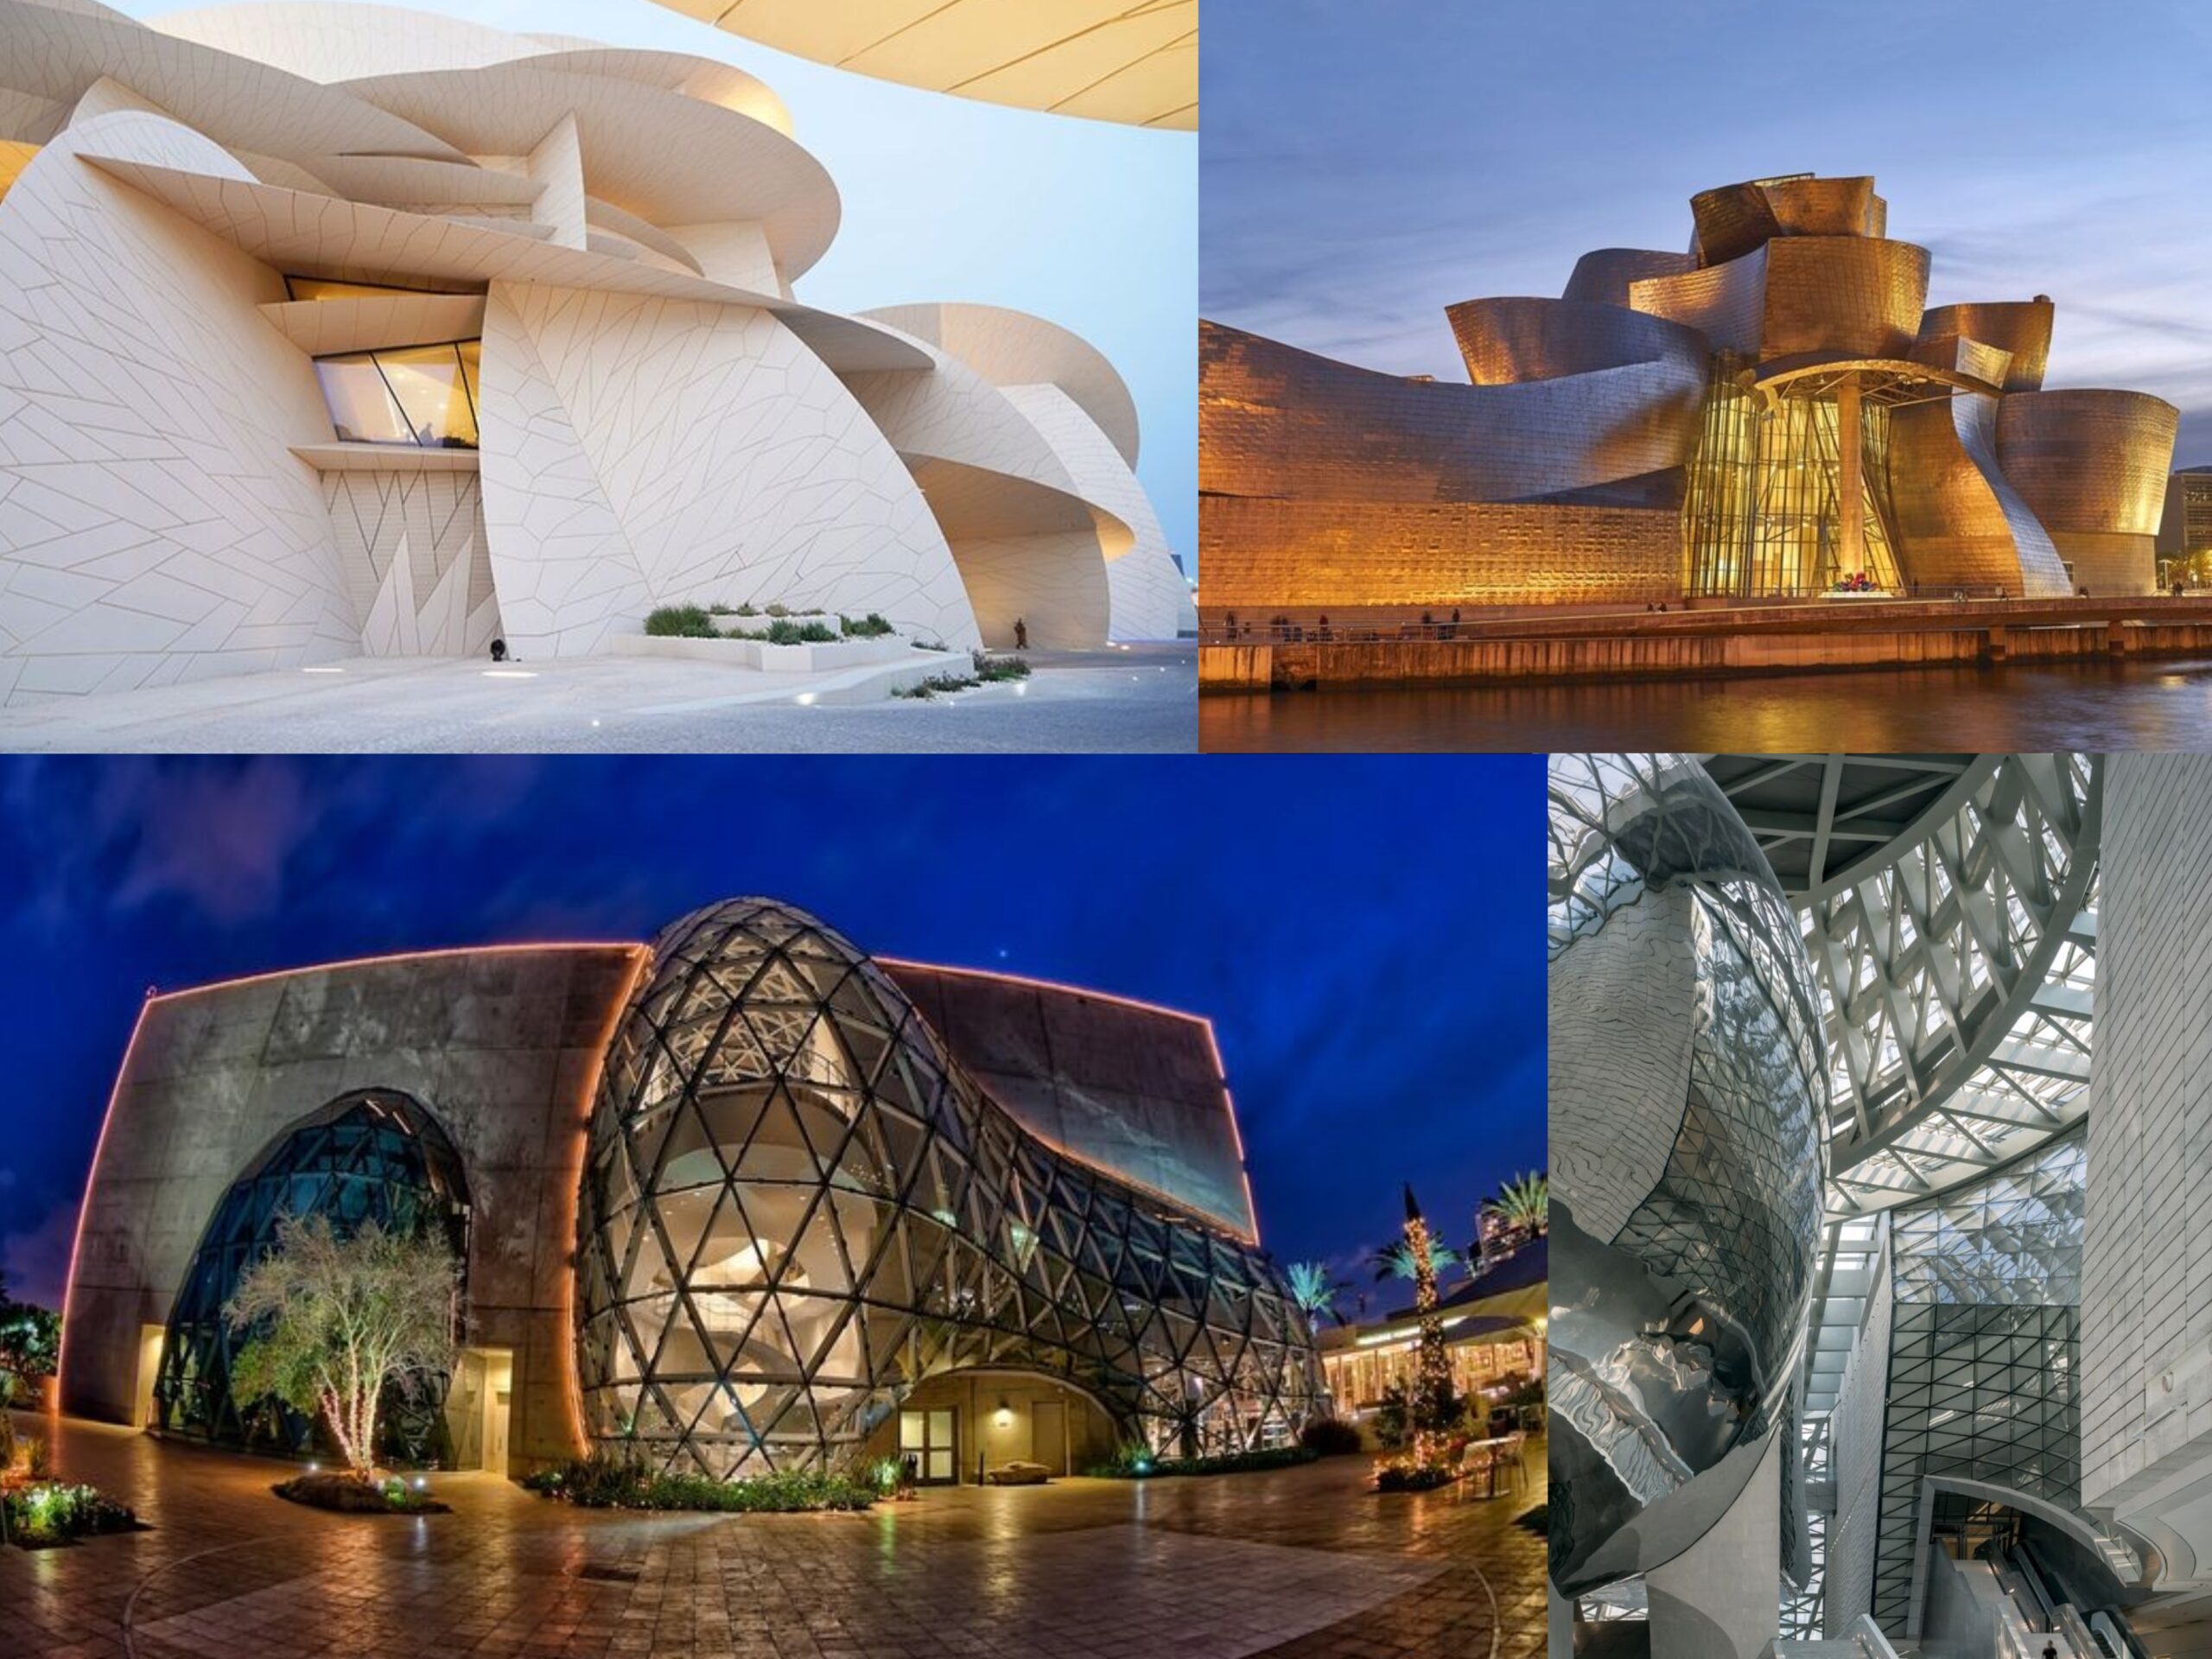 TOP STRIKING ARCHITECTURAL MUSEUMS IN THE WORLD